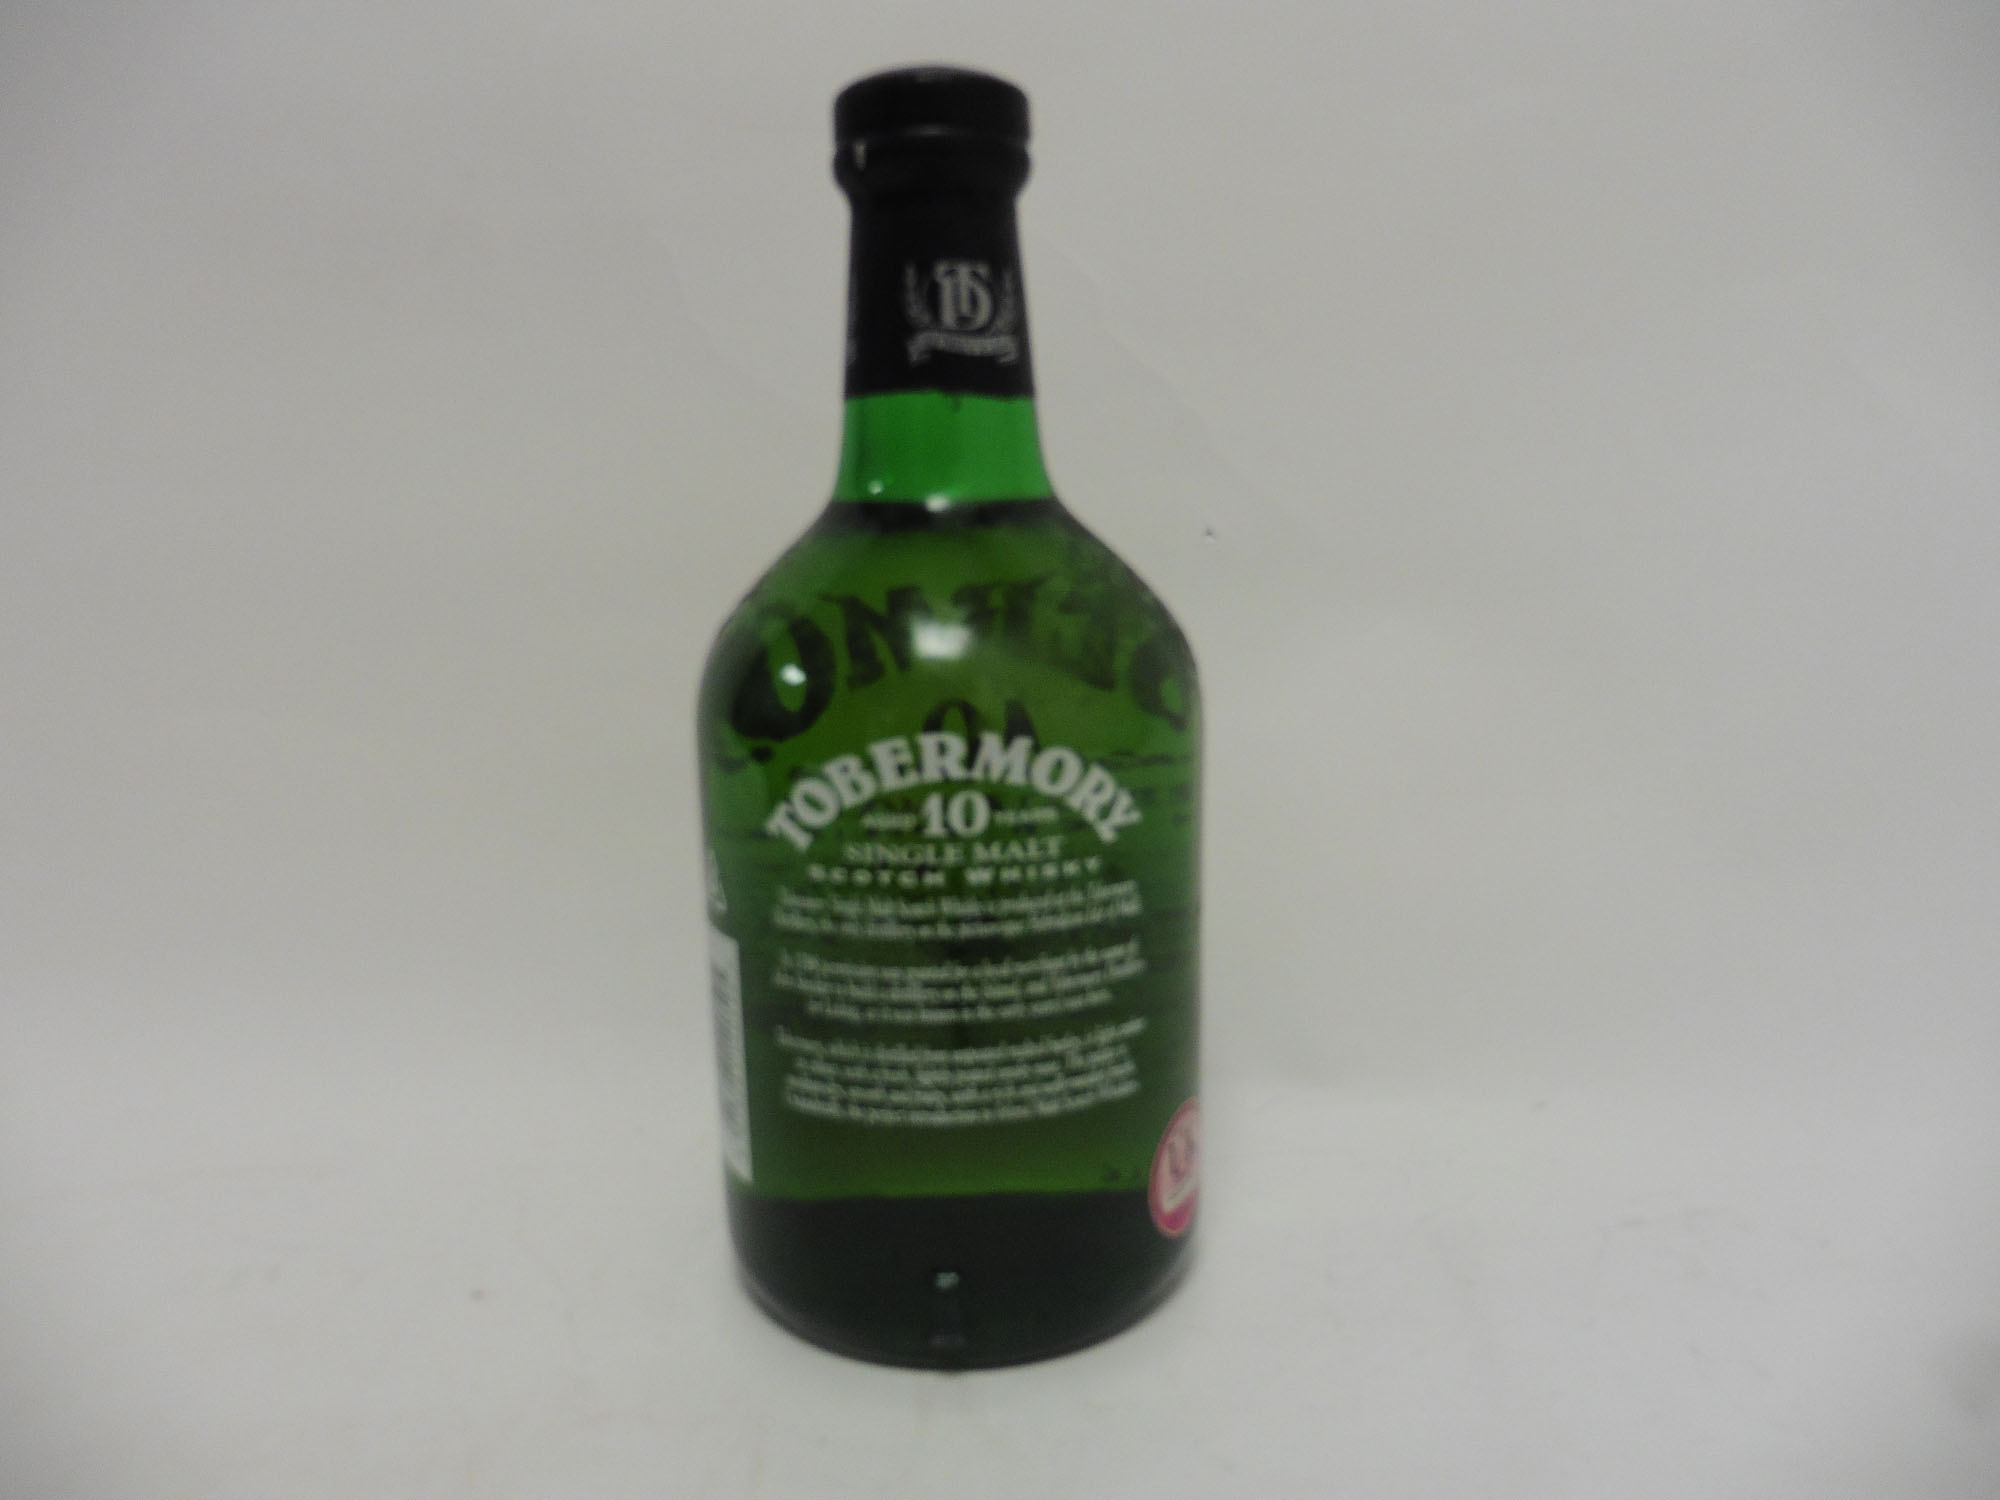 A bottle of Tobermory 10 year old Single Malt Scotch Whisky from The Isle of Mull old style bottle - Image 2 of 2